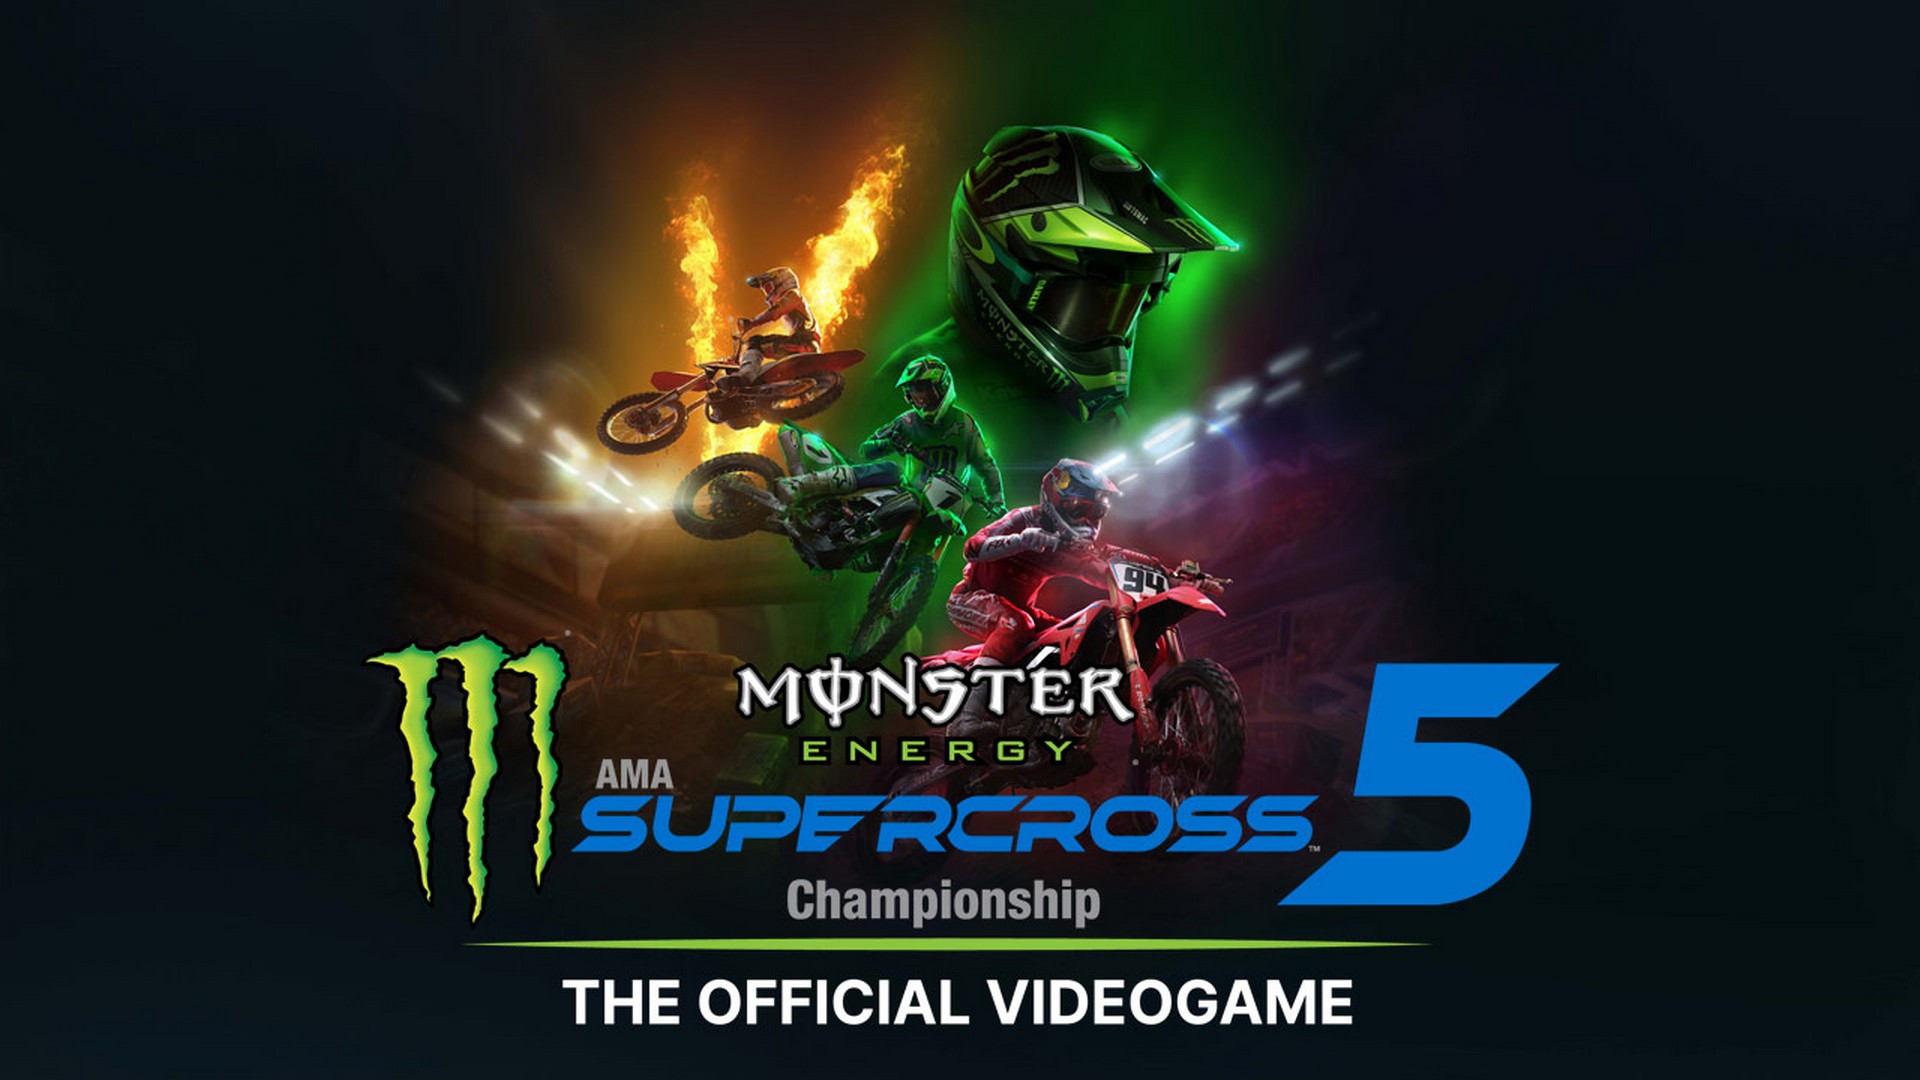 Milestone Announces The 2022 Track Editor Contest – A One Of A Kind Competition For All Monster Energy Supercross – The Official Videogame 5 Players